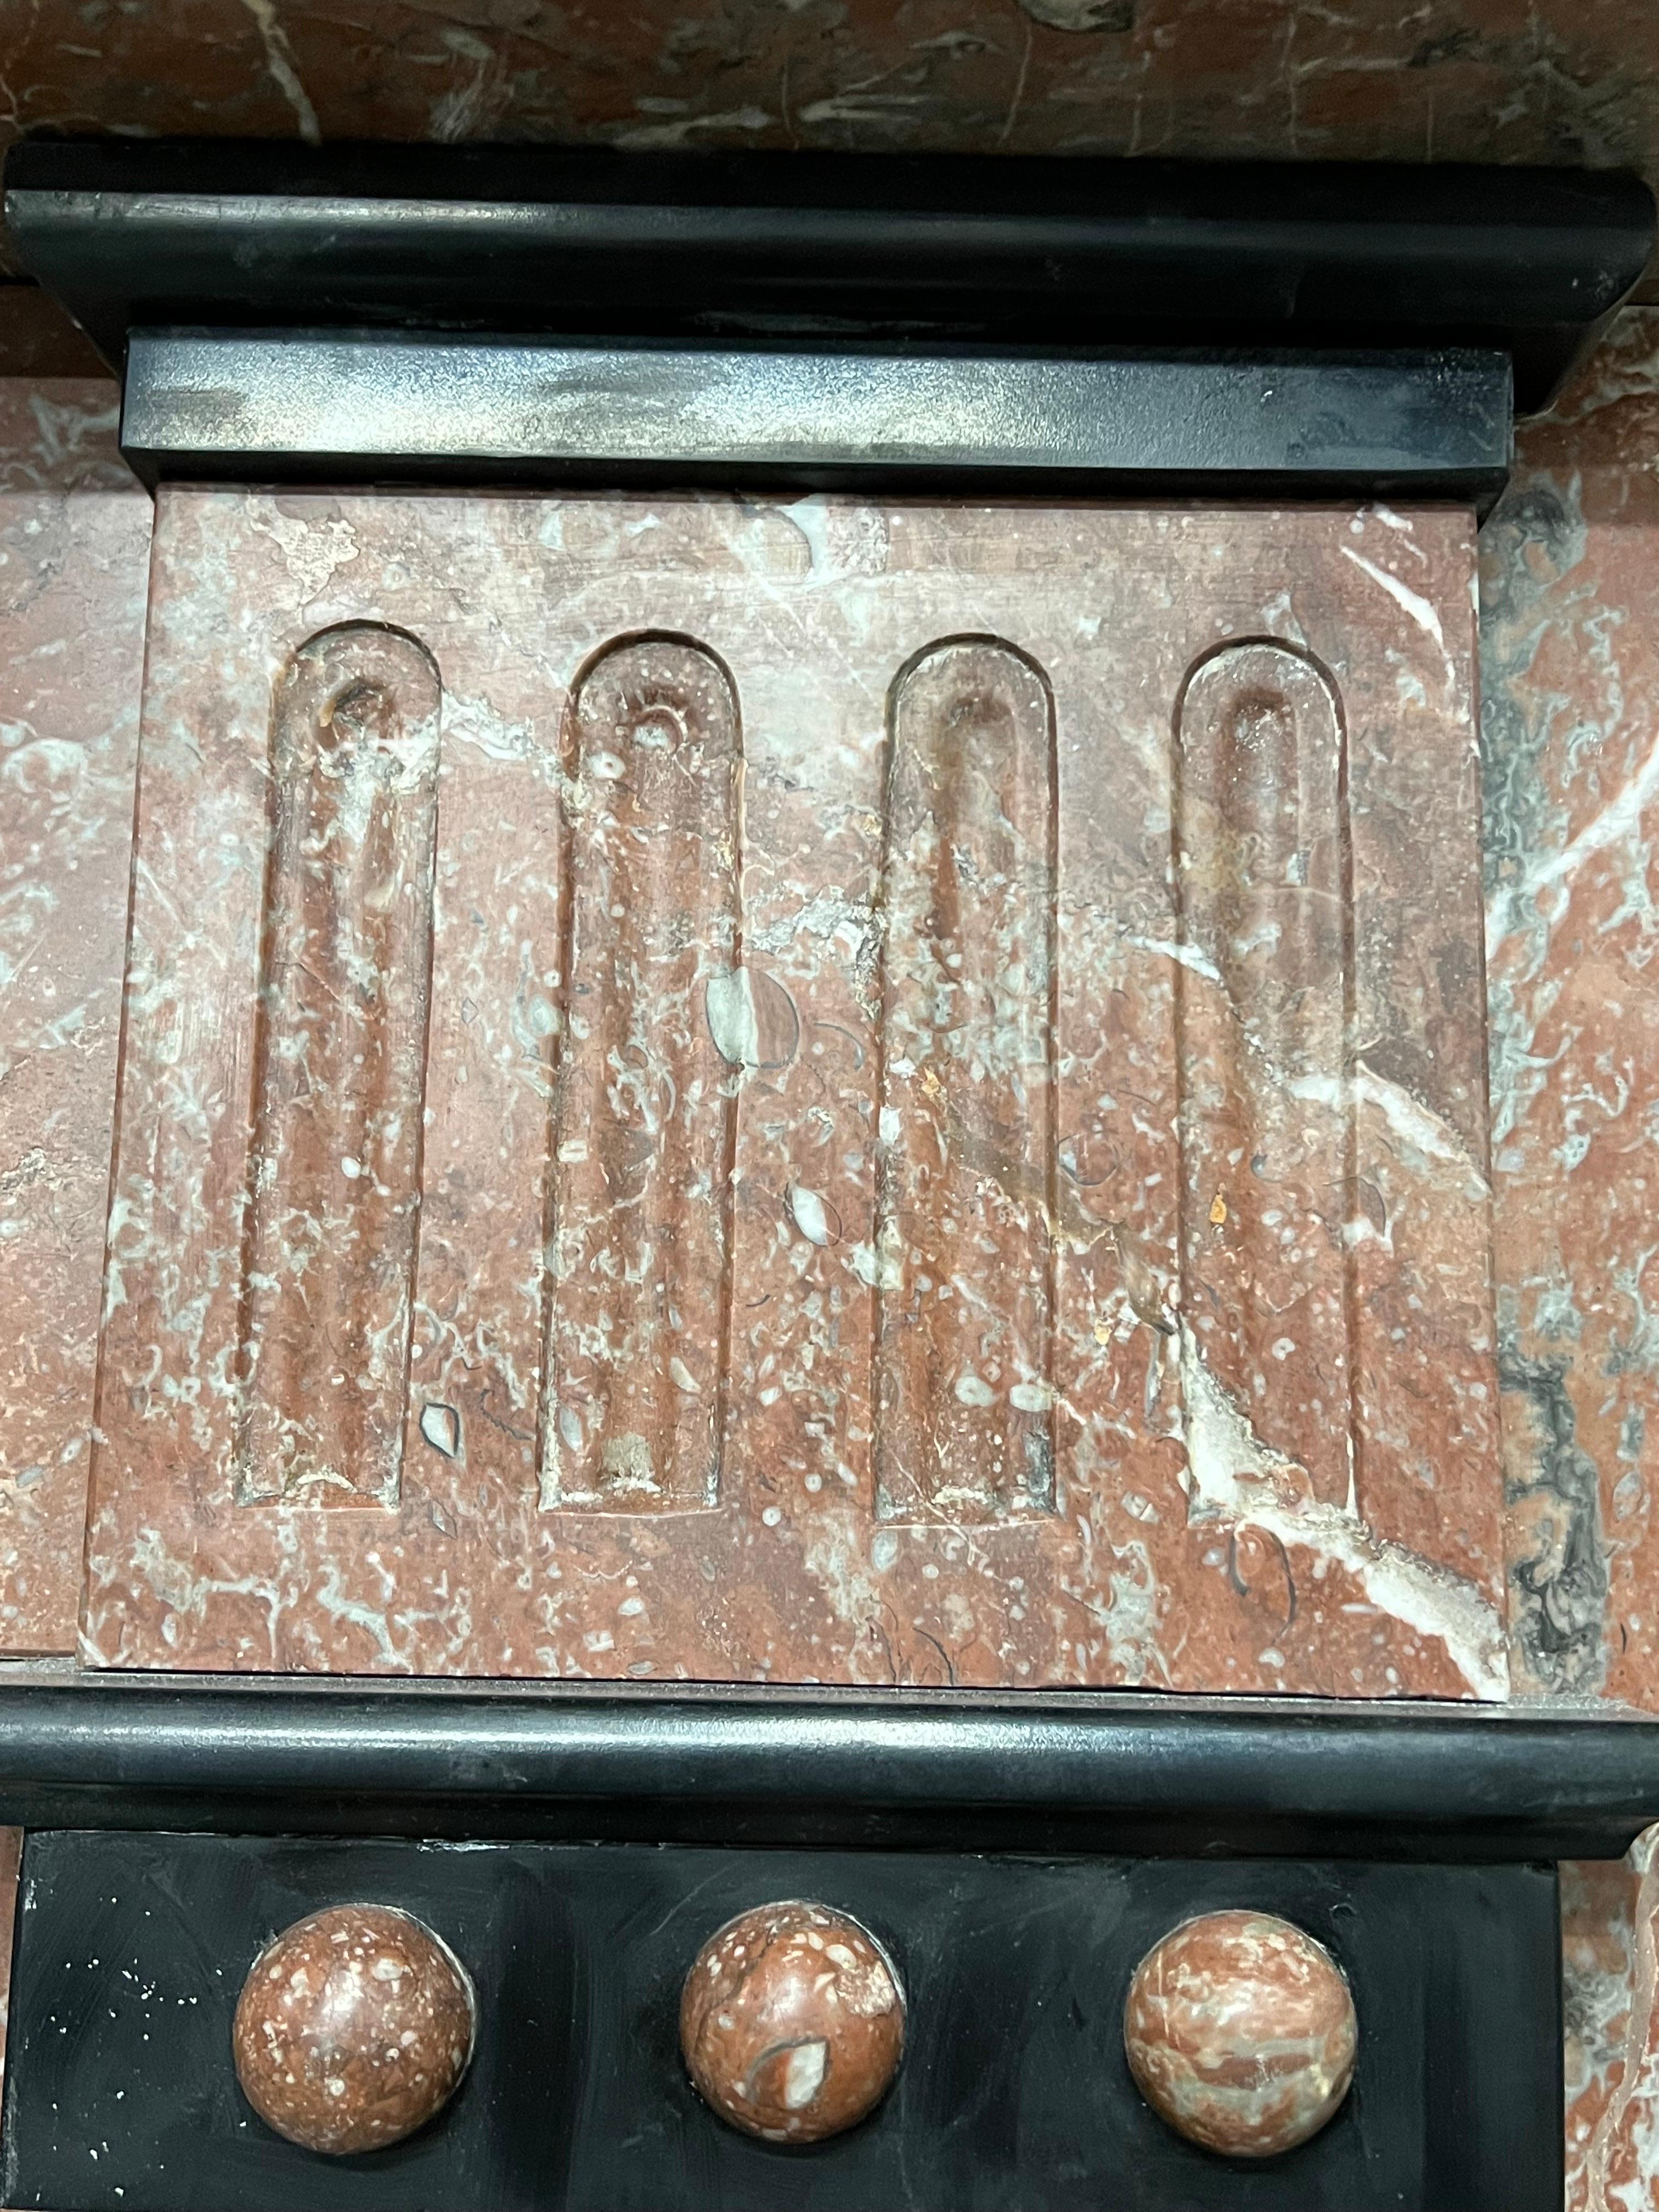 19th Century Marble Fireplace Mantlepiece.
Imposing Original Victorian Marble Fireplace Surround Recently Salvaged from A East London Town House.
Hand Carved And Lightly Polished Showing A Beautiful Lucious Rouge Colouring. Fluted Panelling to Its